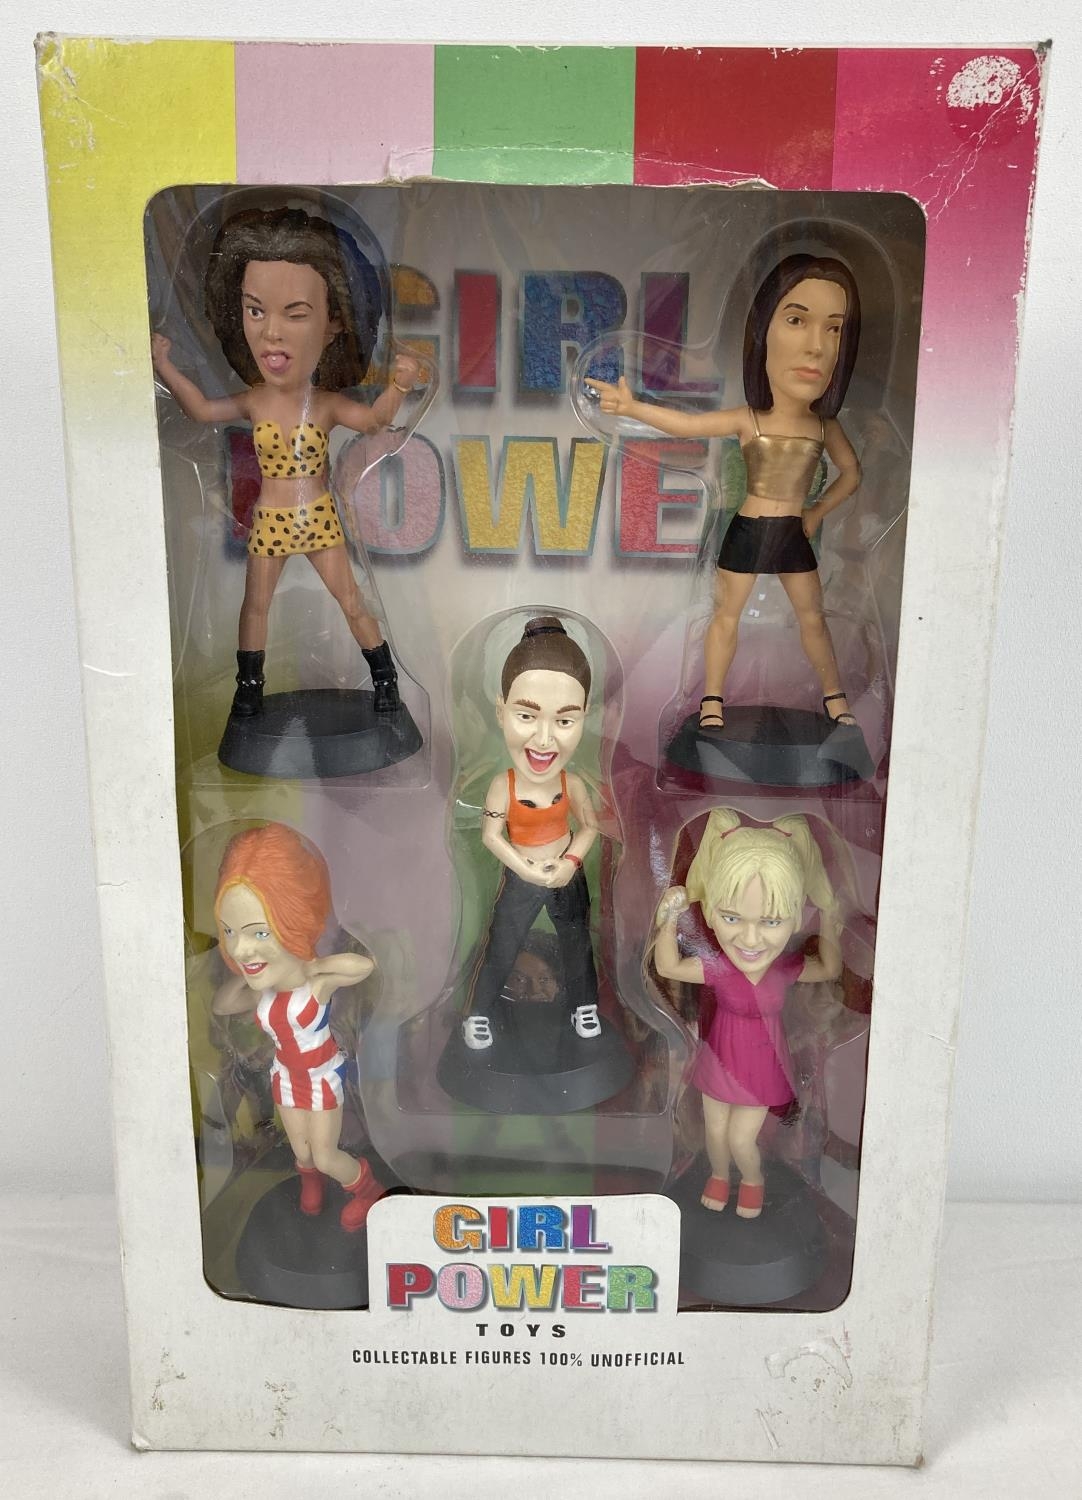 A boxed set of 1997 Girl Power Toys, 14cm figurines of The Spice Girls.